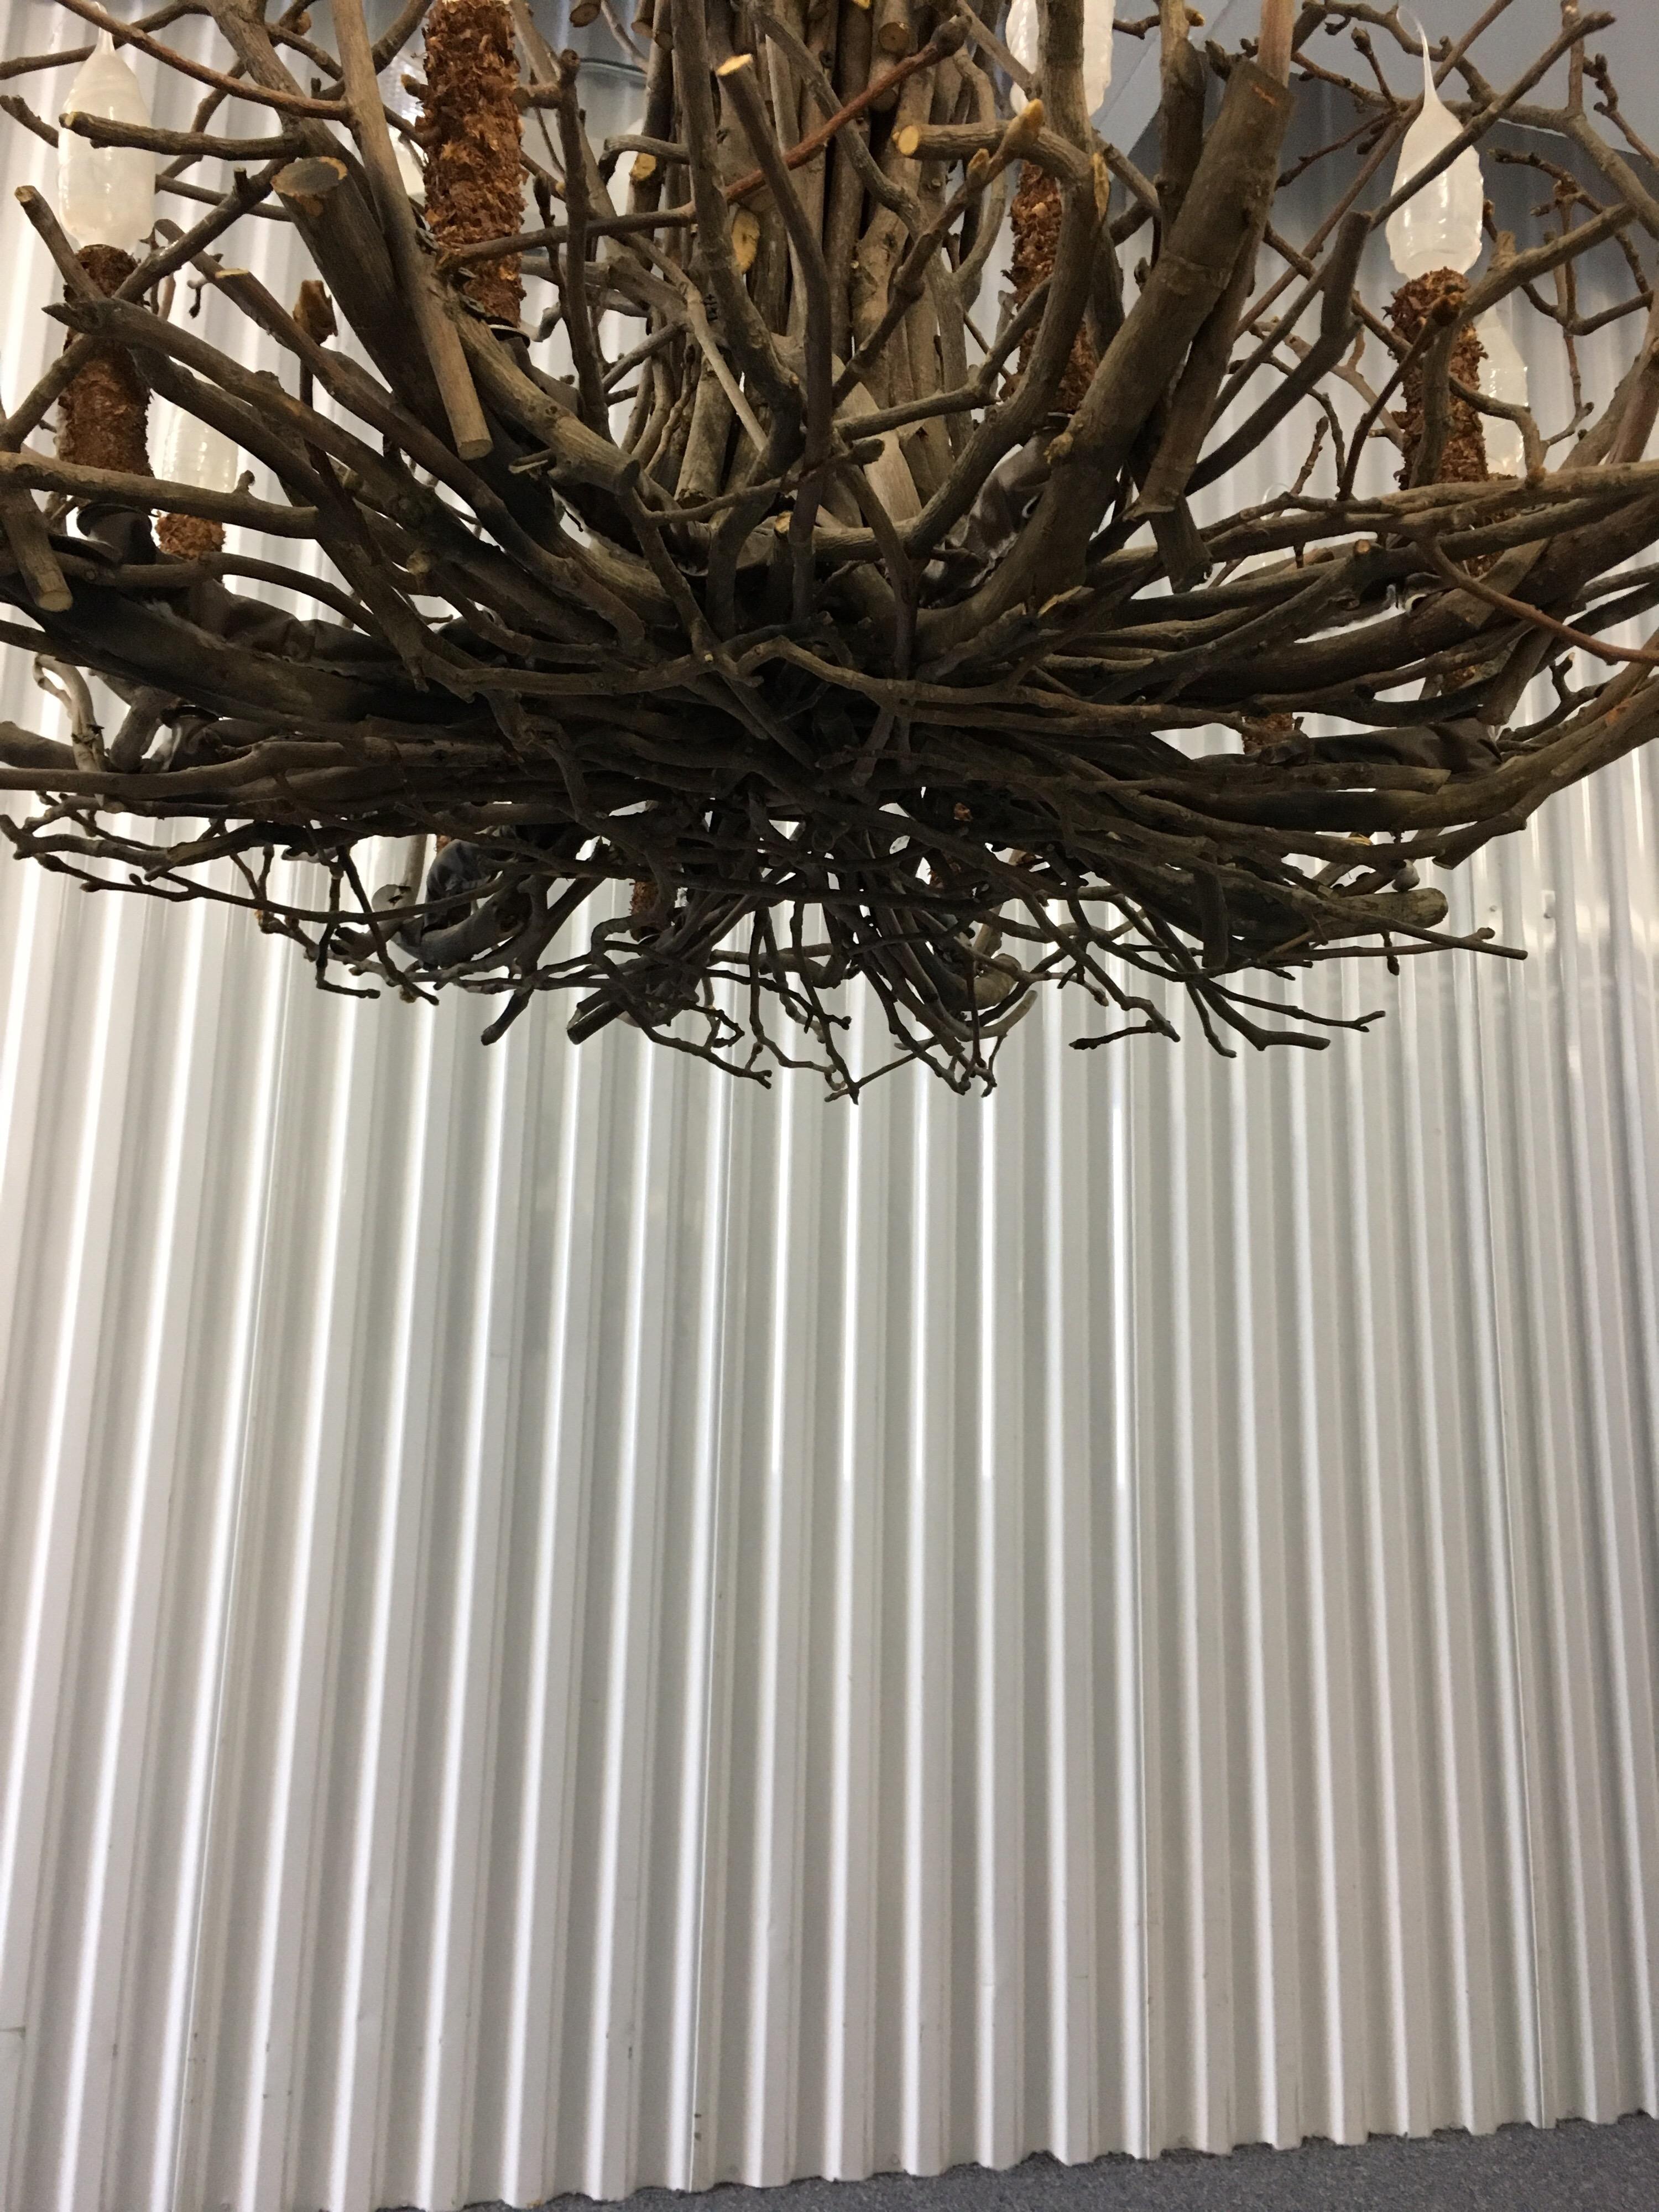 Willow Twig Branch Eight Arm Chandelier 3